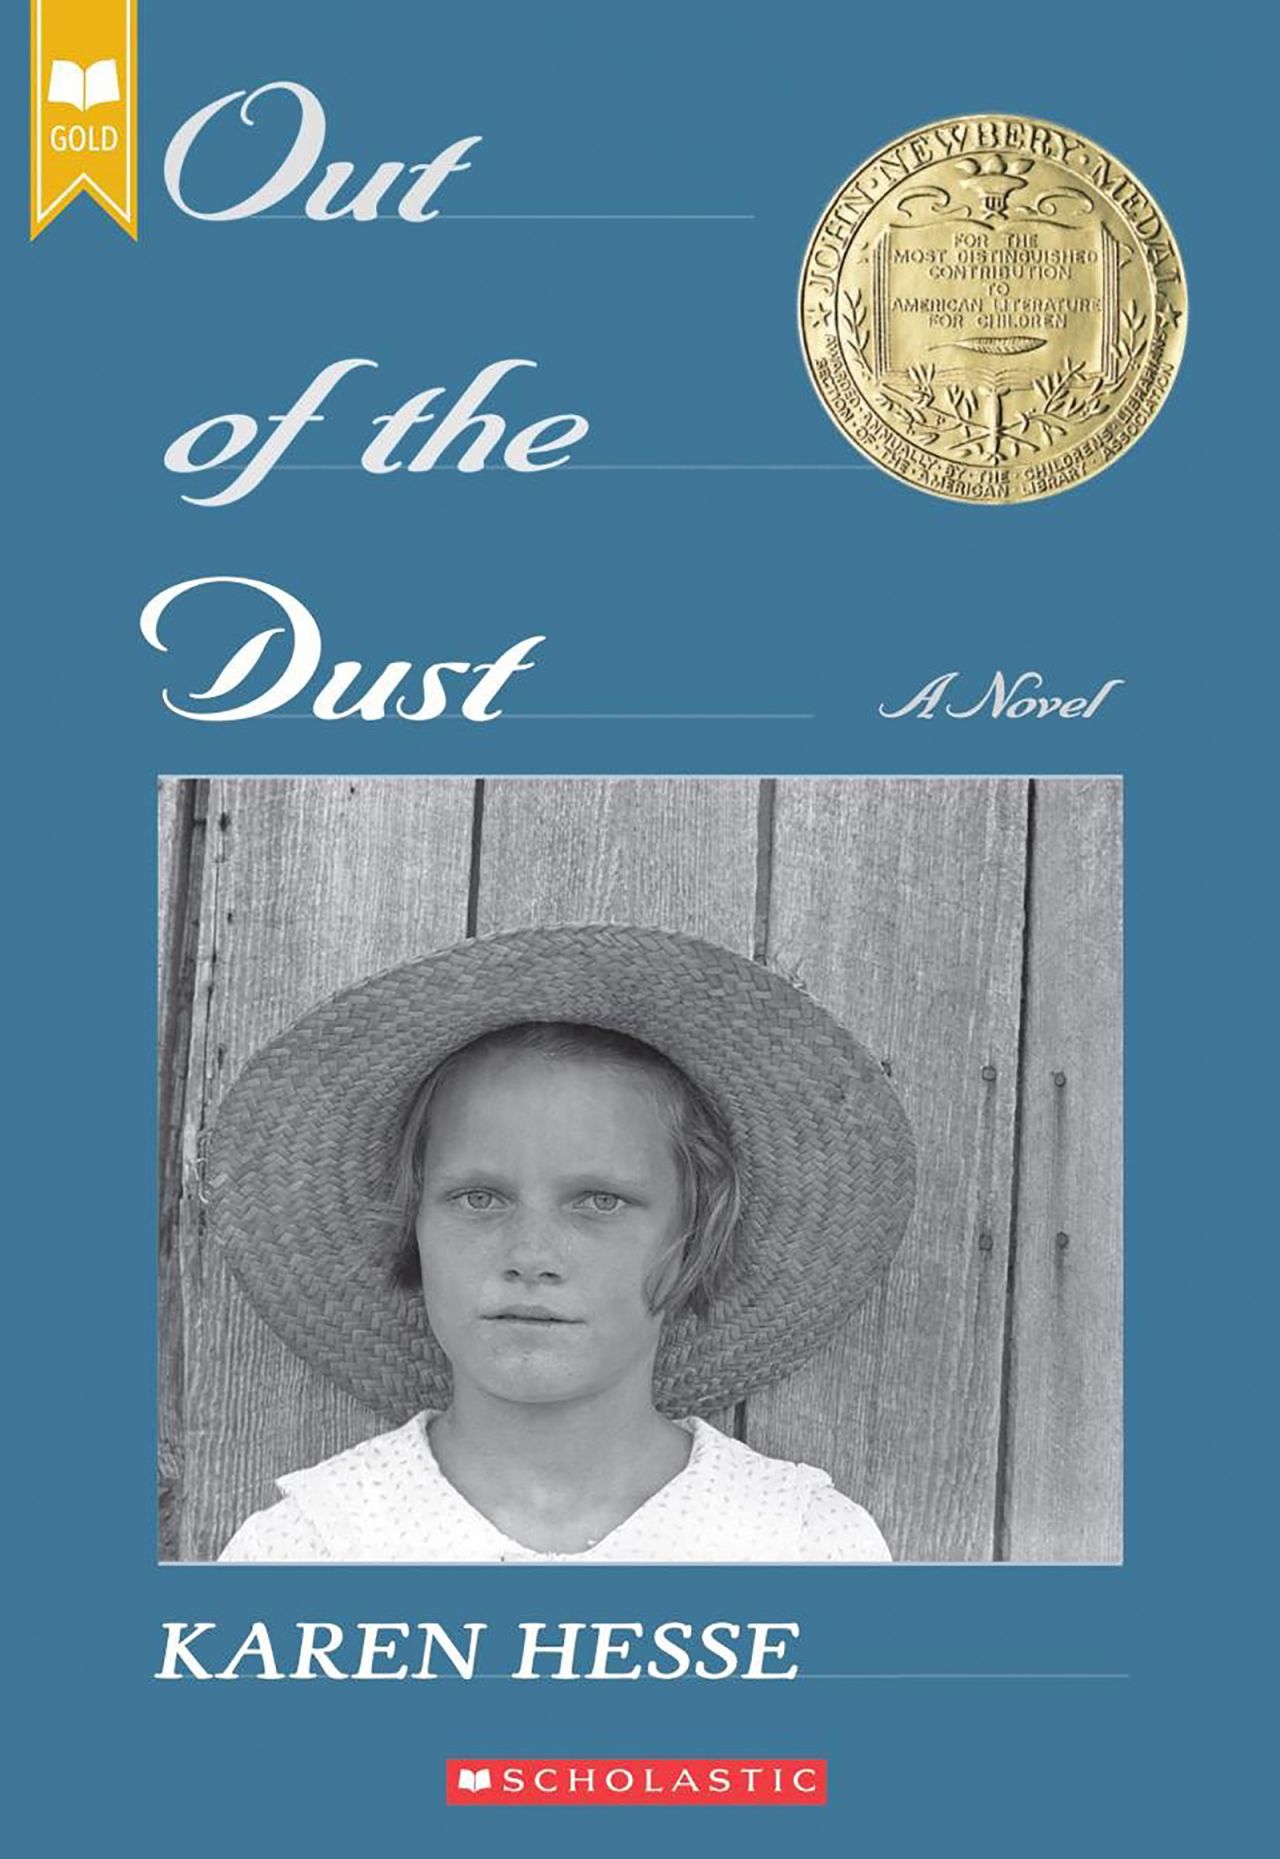 "Out of the Dust" by Karen Hesse depicts fighting spirit of 14-year-old Billie Jo amid the terrible toll of the Great Depression and Dust Bowl on his farming community.